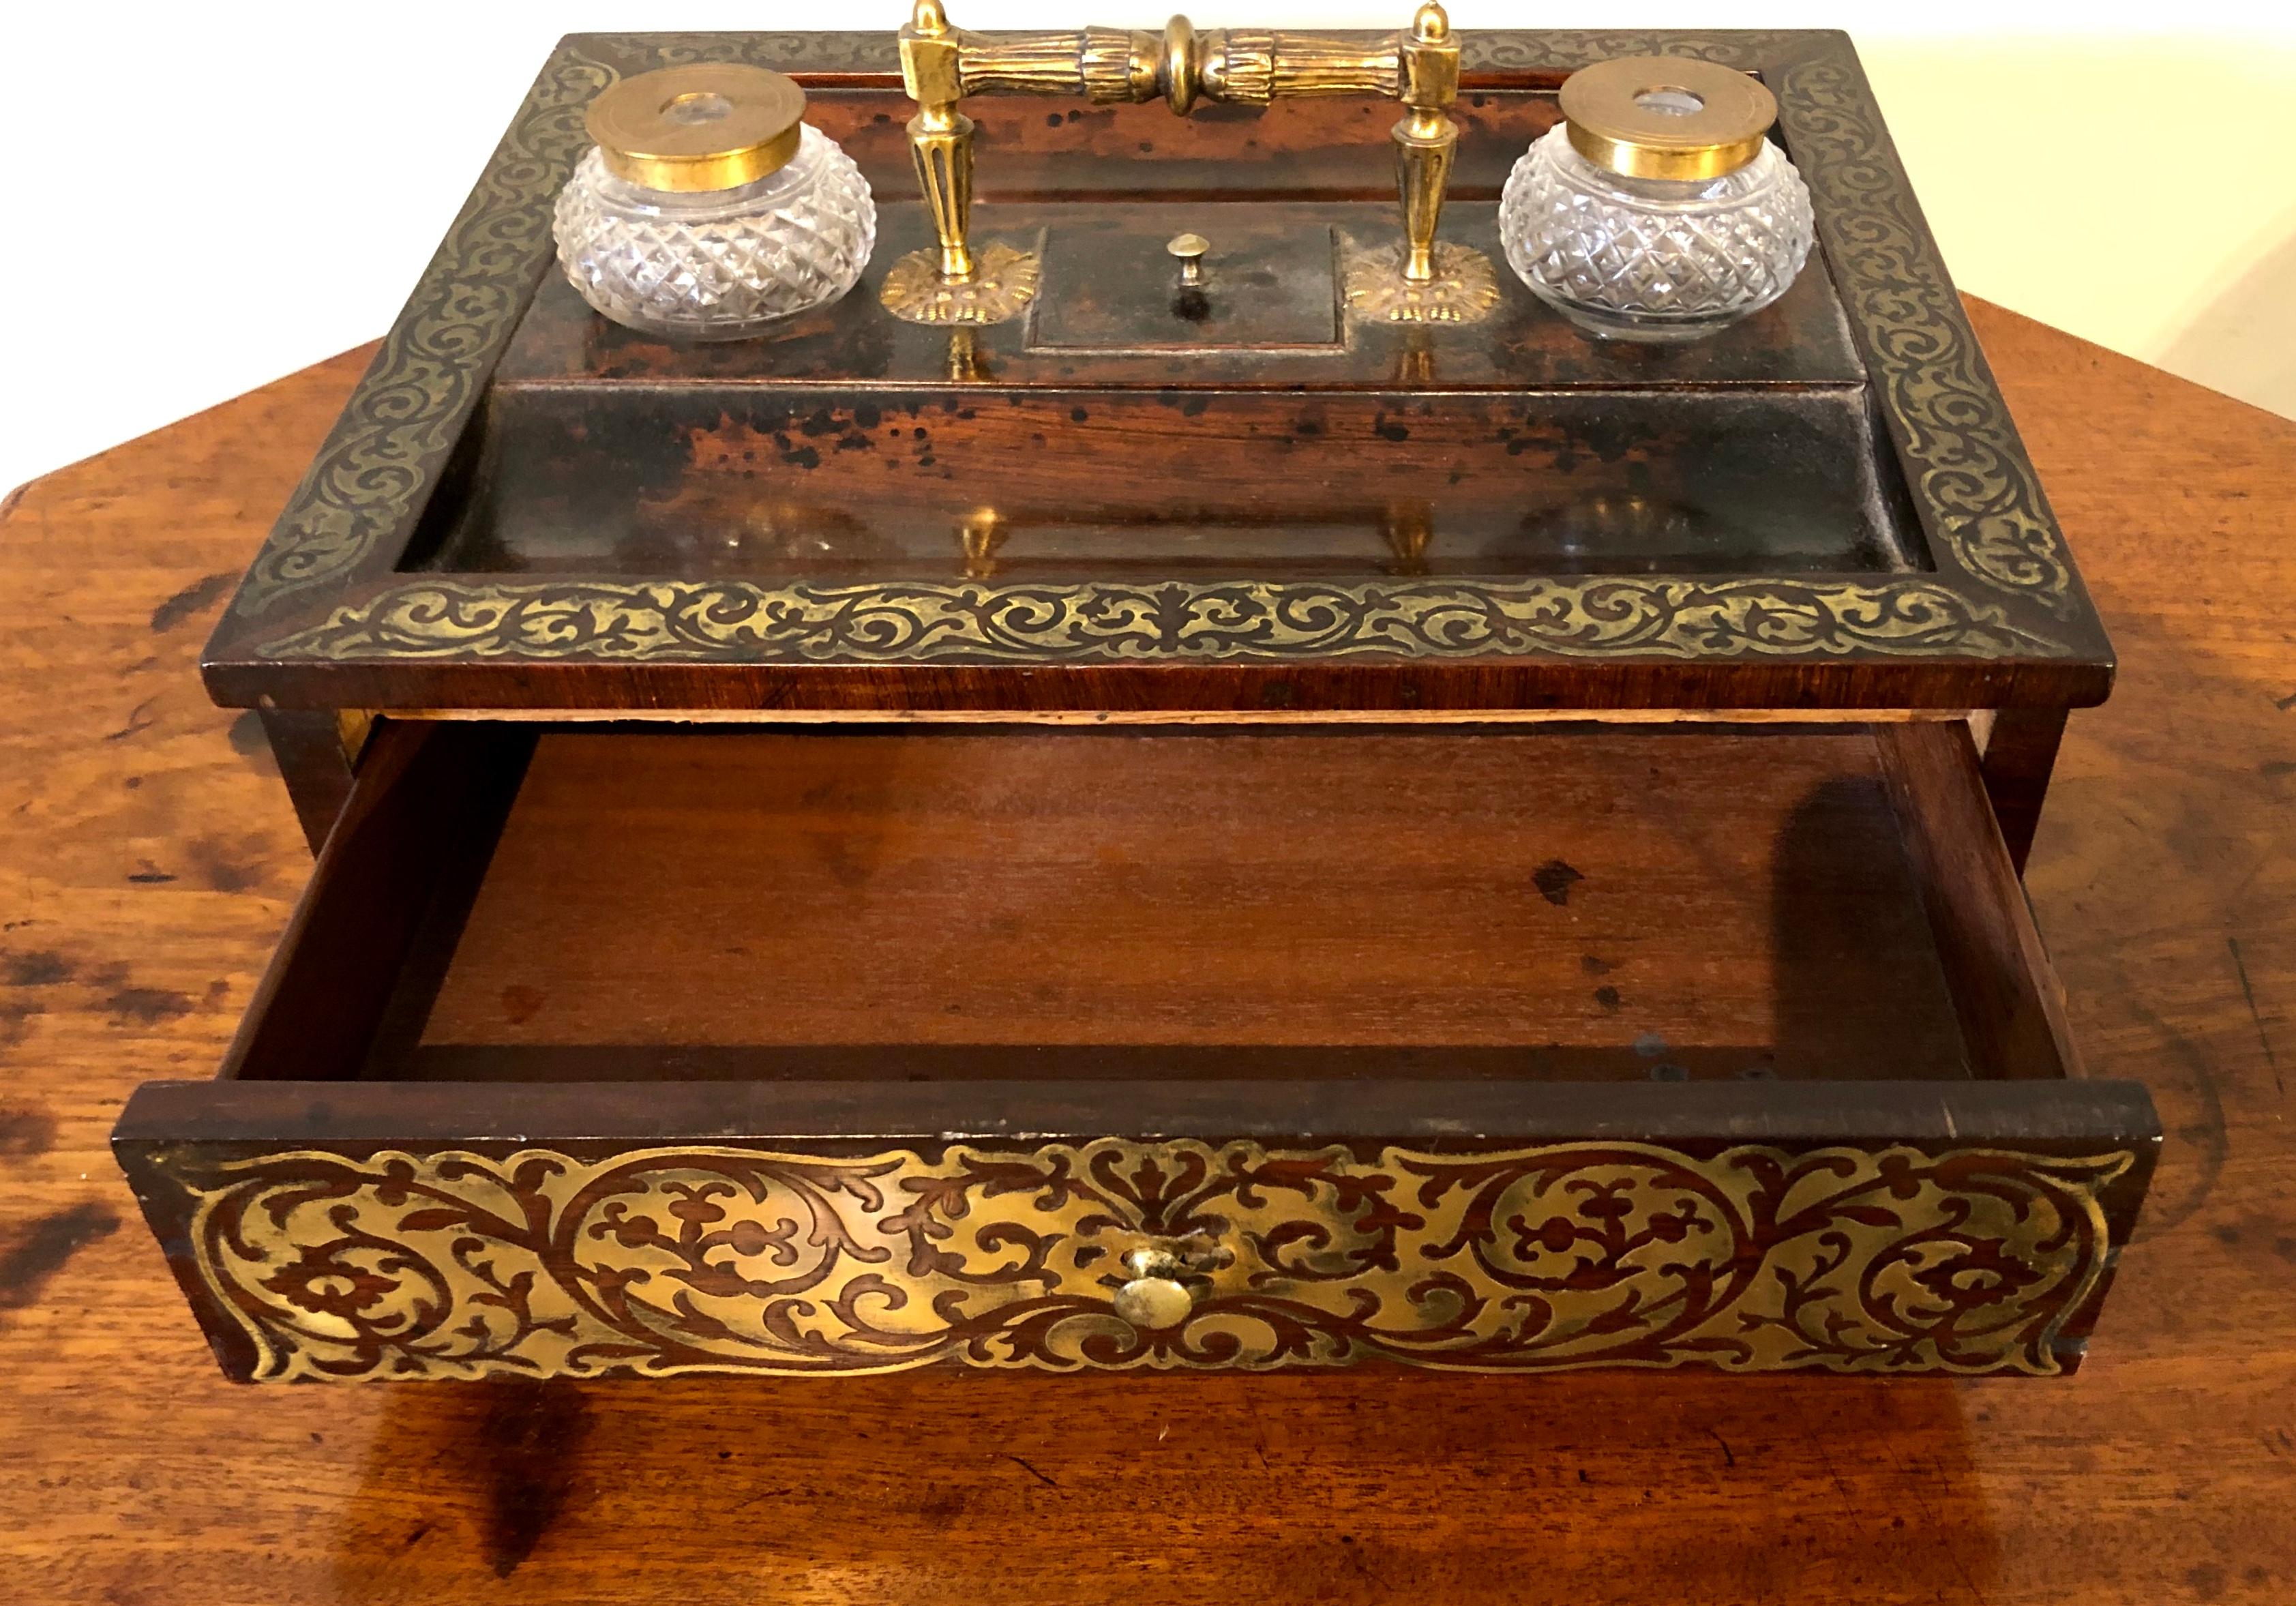 19th Century Regency Brass Inlaid Desk Pen and Ink Stand 1